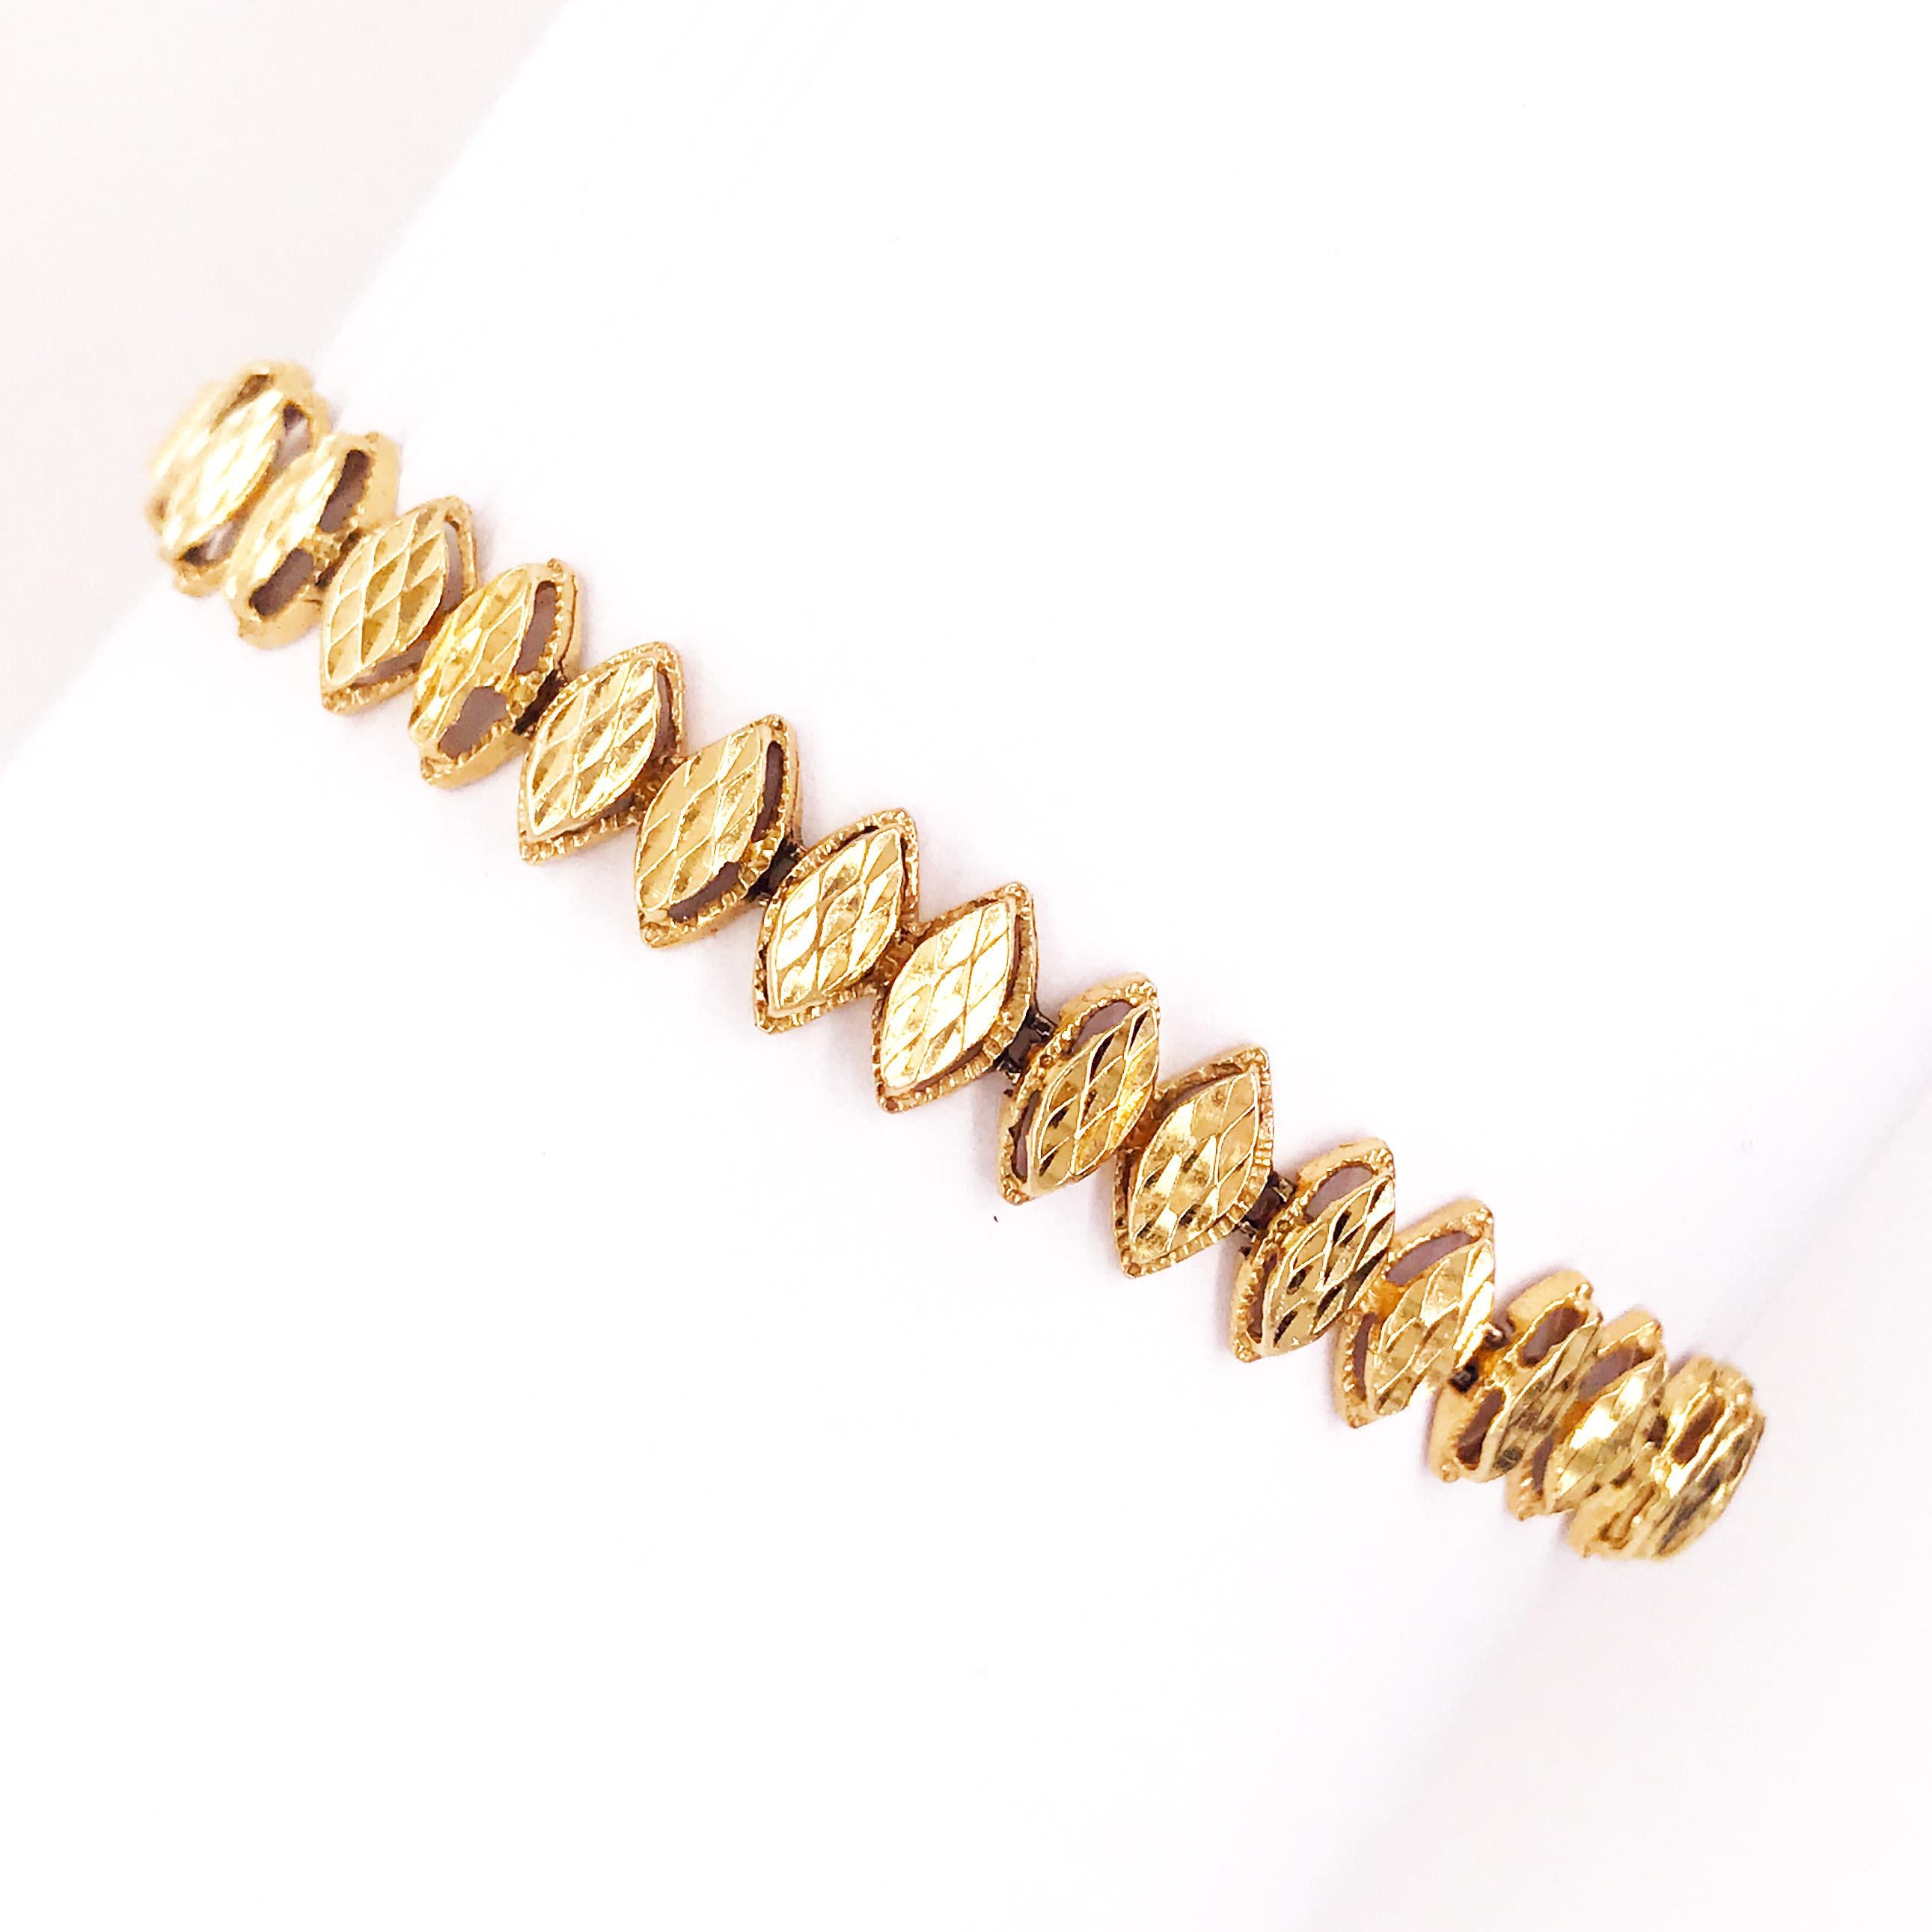 This is a fancy additional to any chain or charm bracelet collection. Each link is a marquise shaped gold piece that has been hand made and hand crafted together into an elegant, unique bracelet. The links have a diamond cut texture and high polish